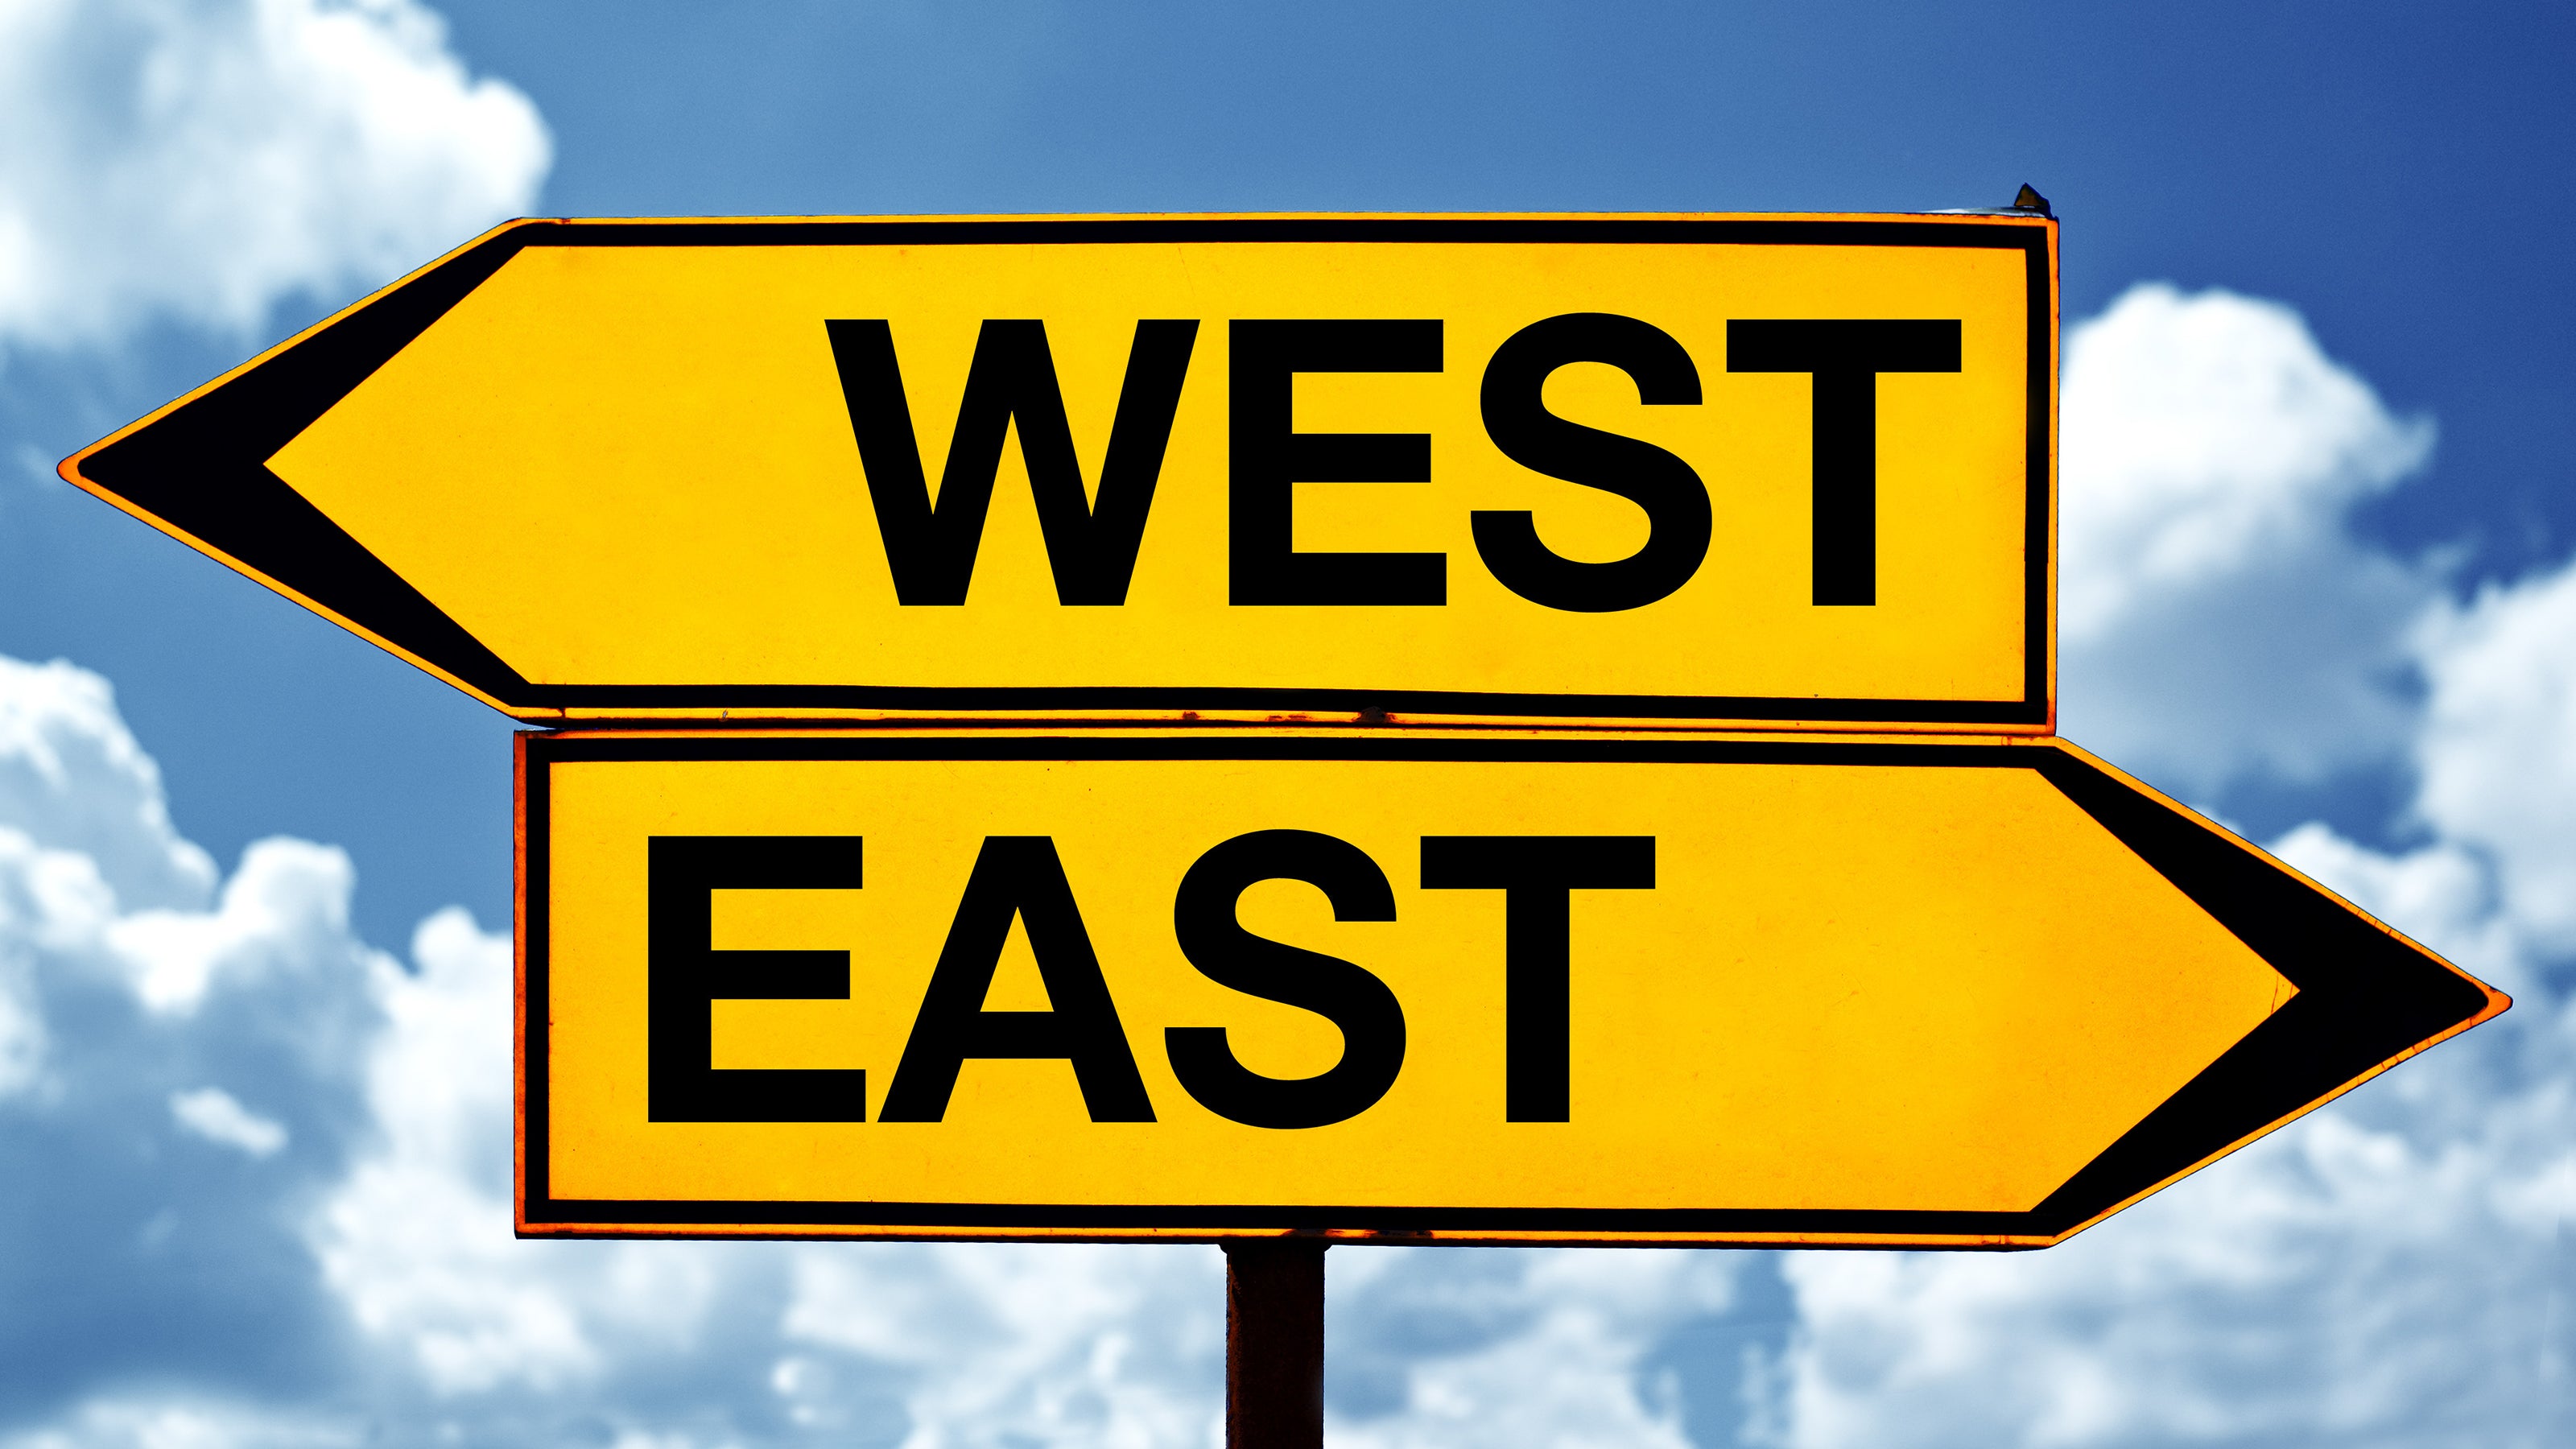 East vs West.